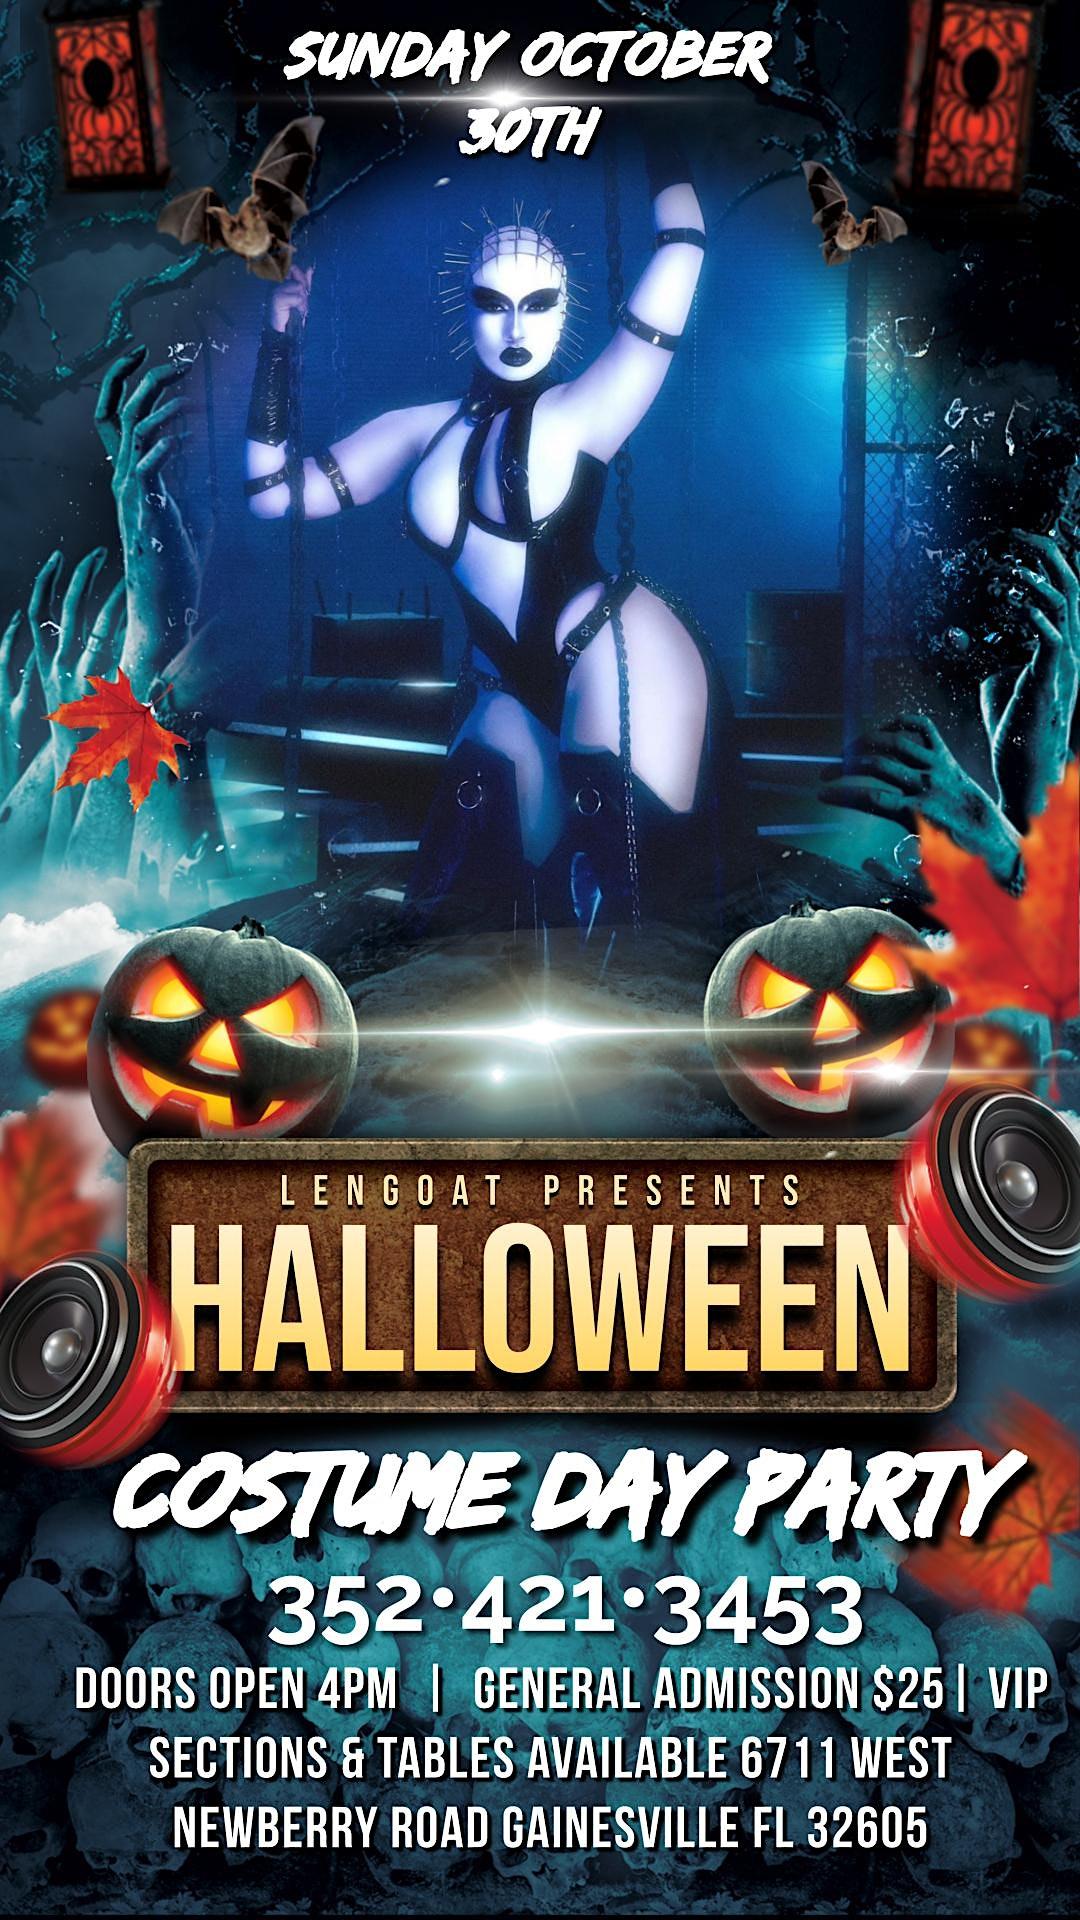 Halloween Costume Day Party
Sun Oct 30, 4:00 PM - Sun Oct 30, 10:00 PM
in 11 days